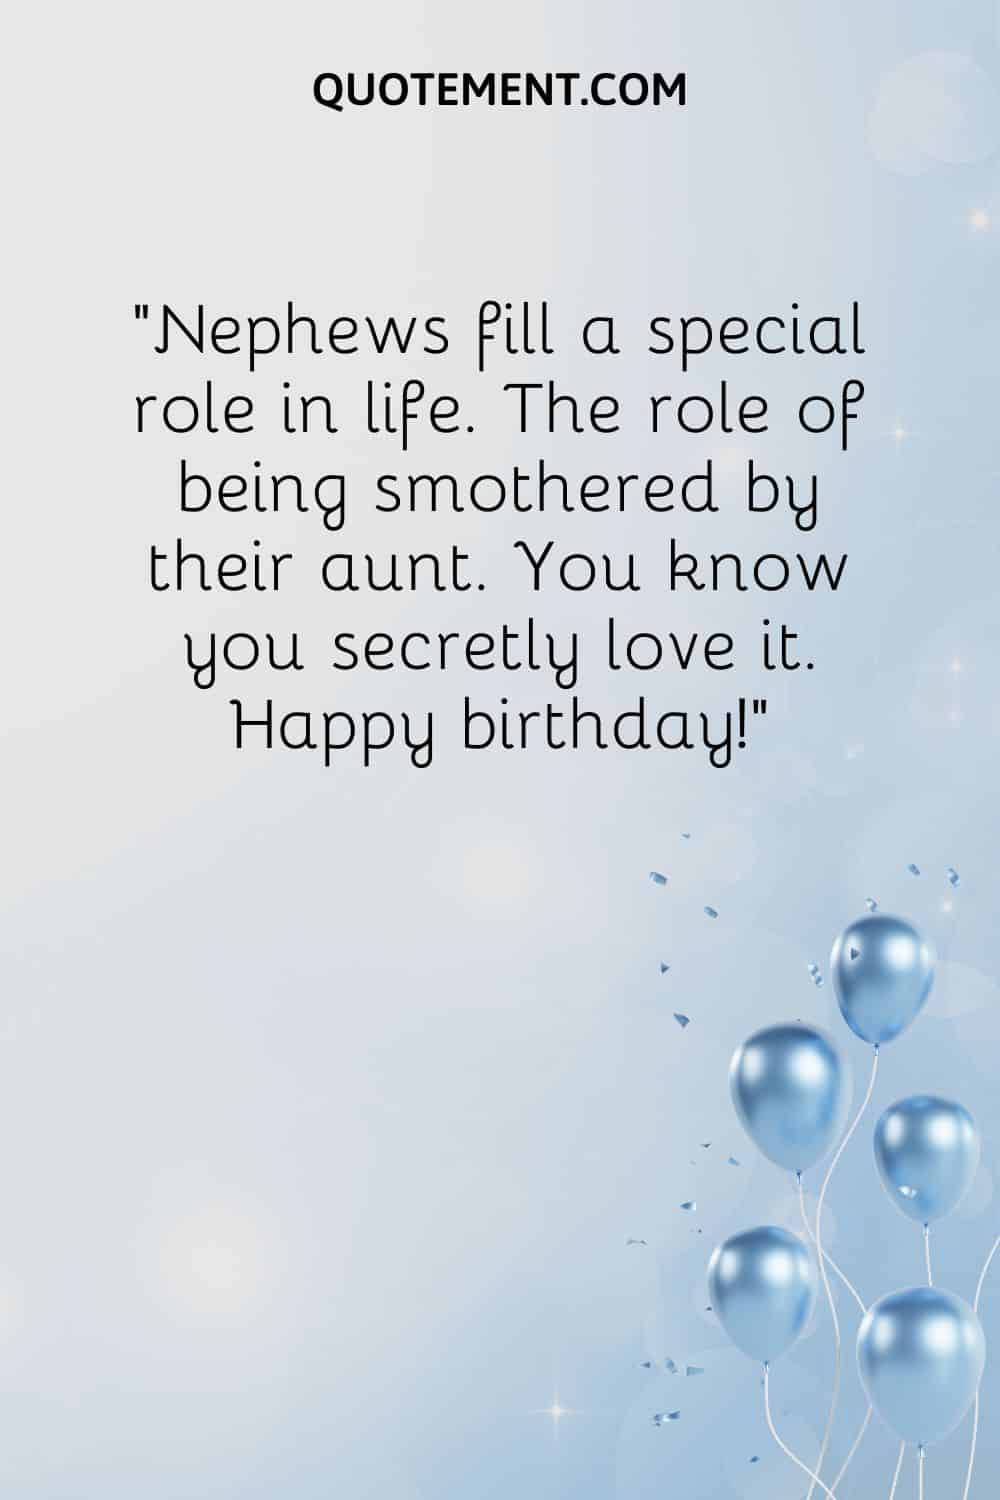 “Nephews fill a special role in life. The role of being smothered by their aunt. You know you secretly love it. Happy birthday!”